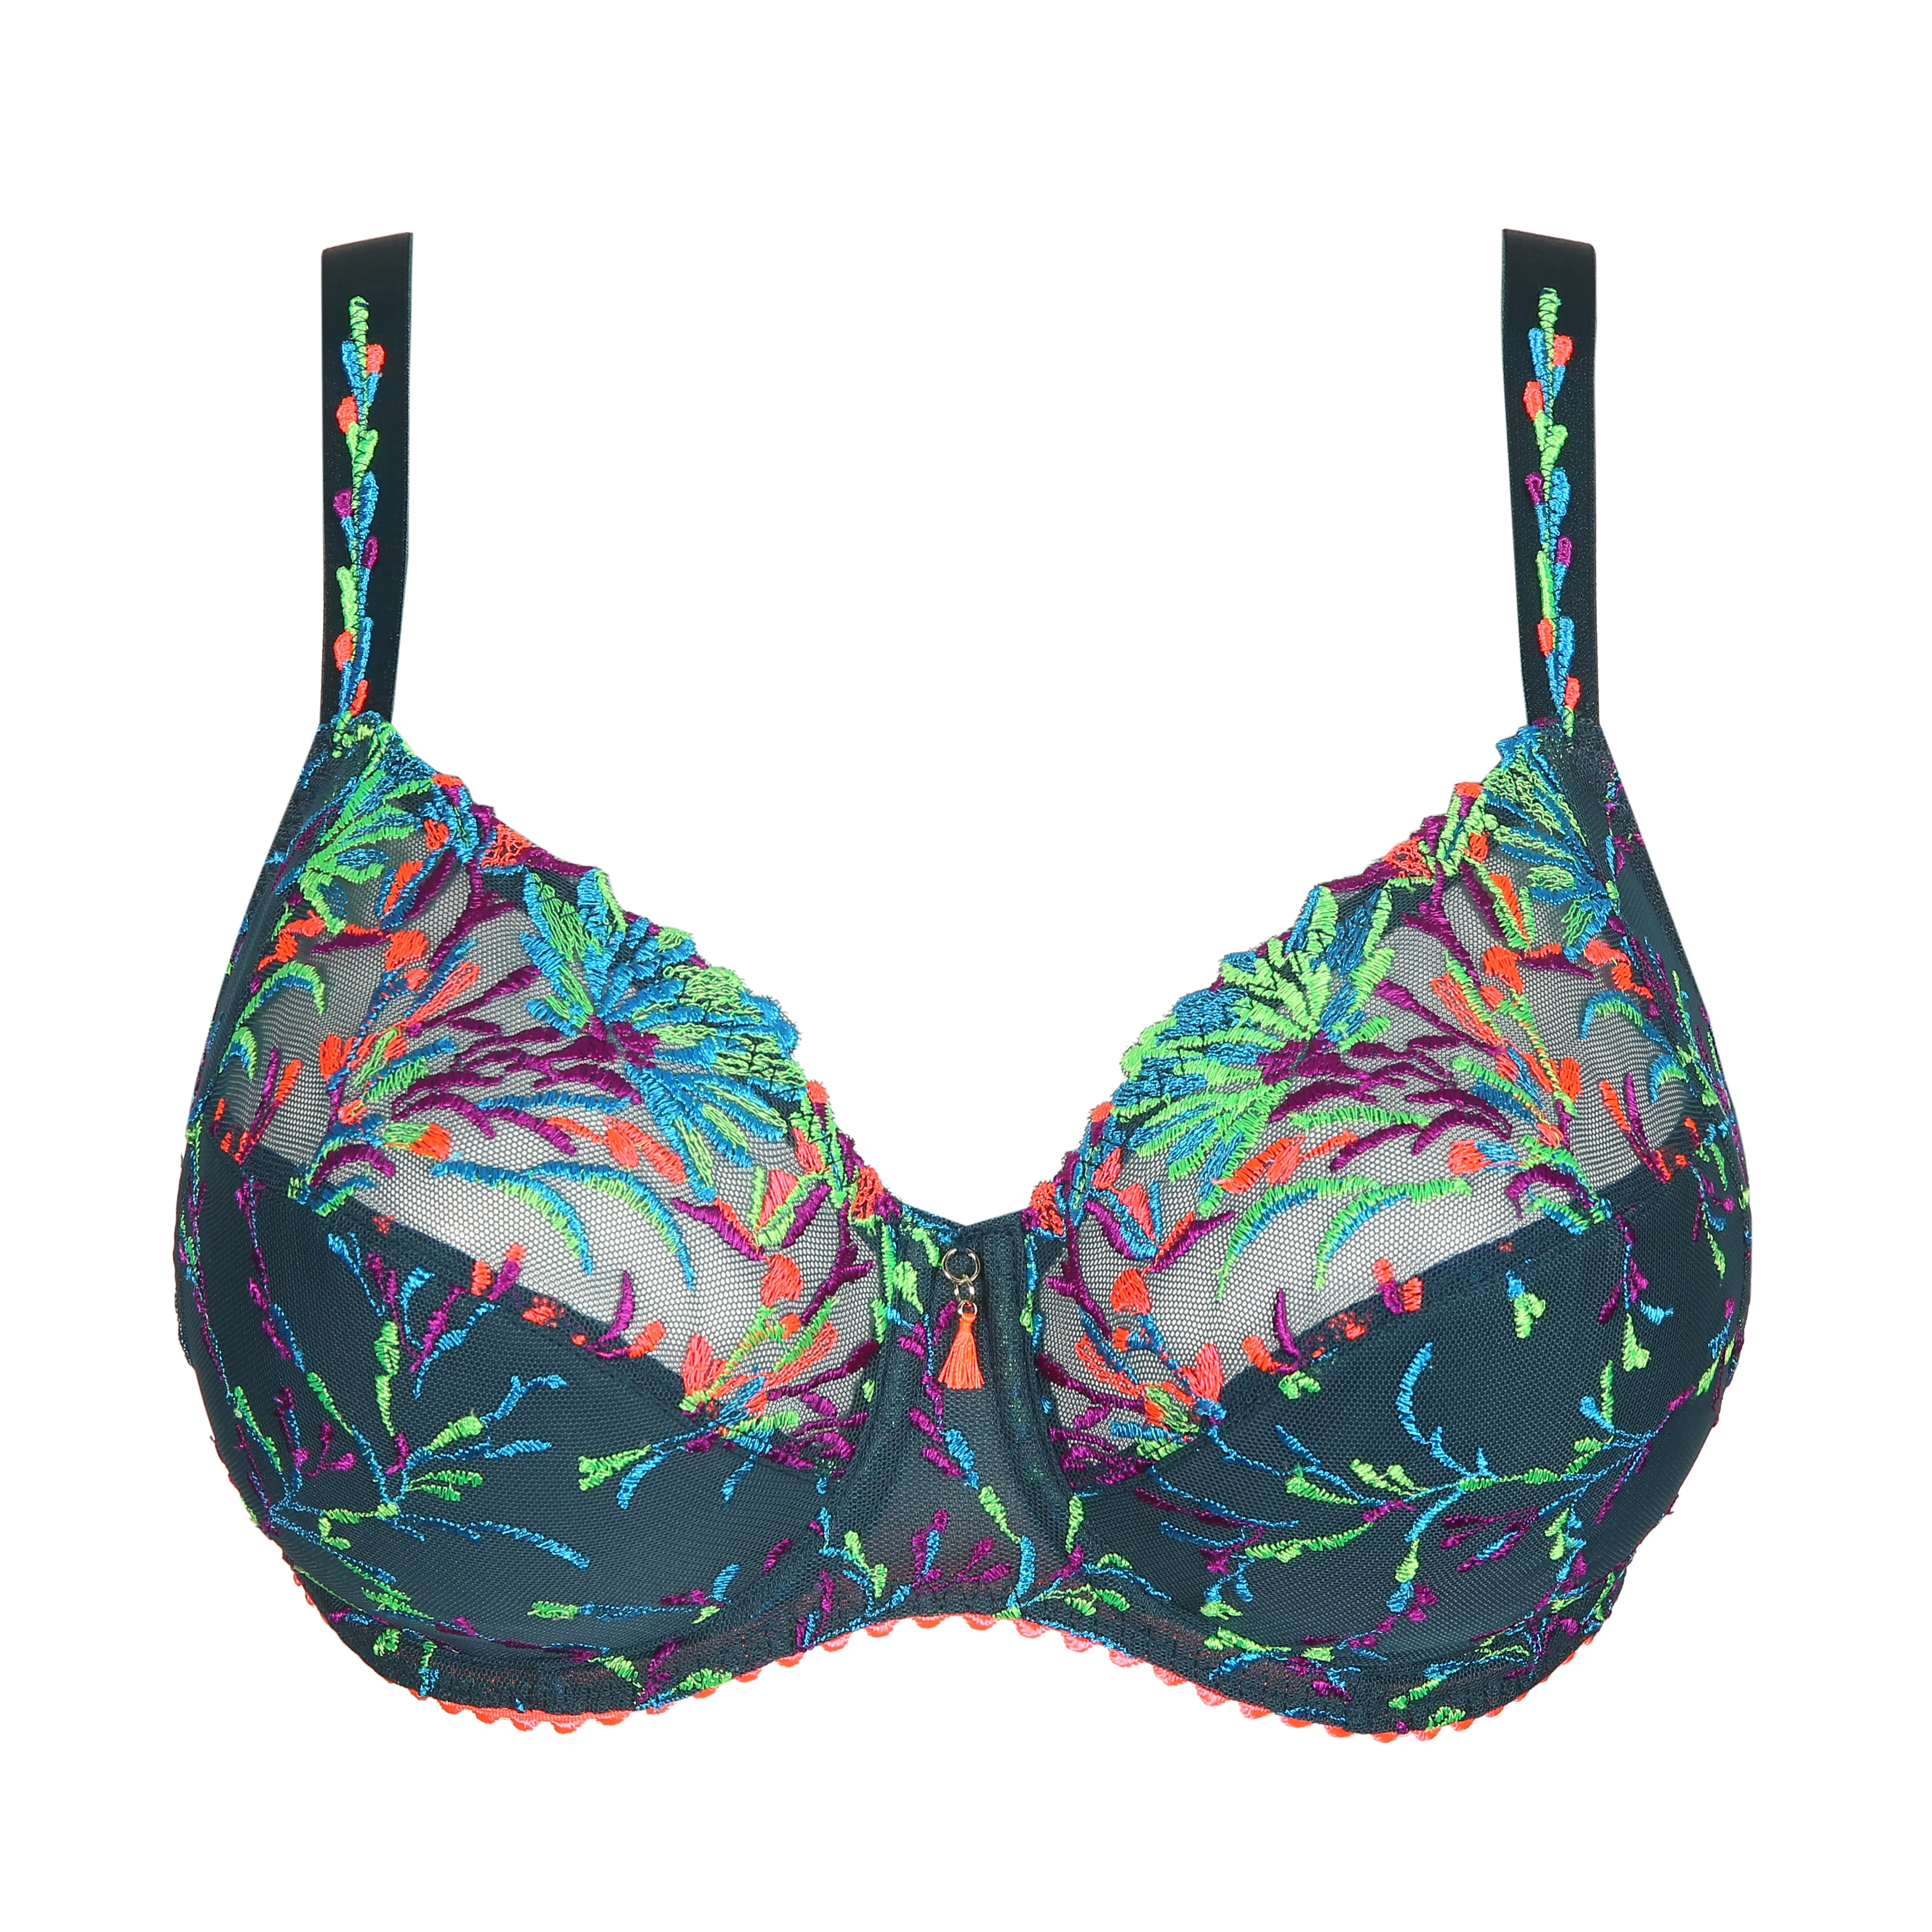 44d Size Cup Bra - Get Best Price from Manufacturers & Suppliers in India